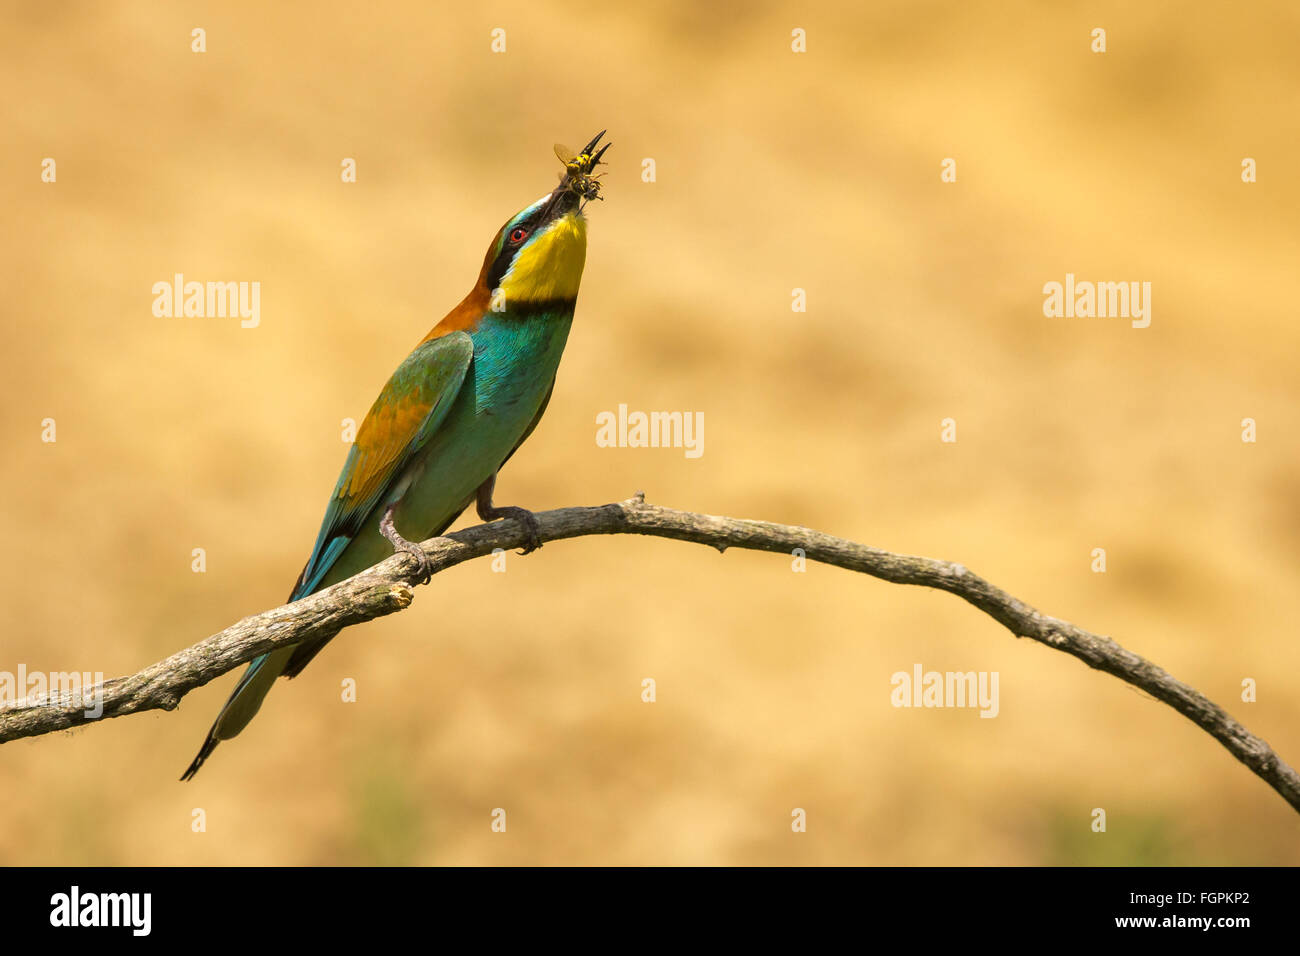 European Bee-eater (Merops apiaster) perched on a branch and holding a bee Stock Photo